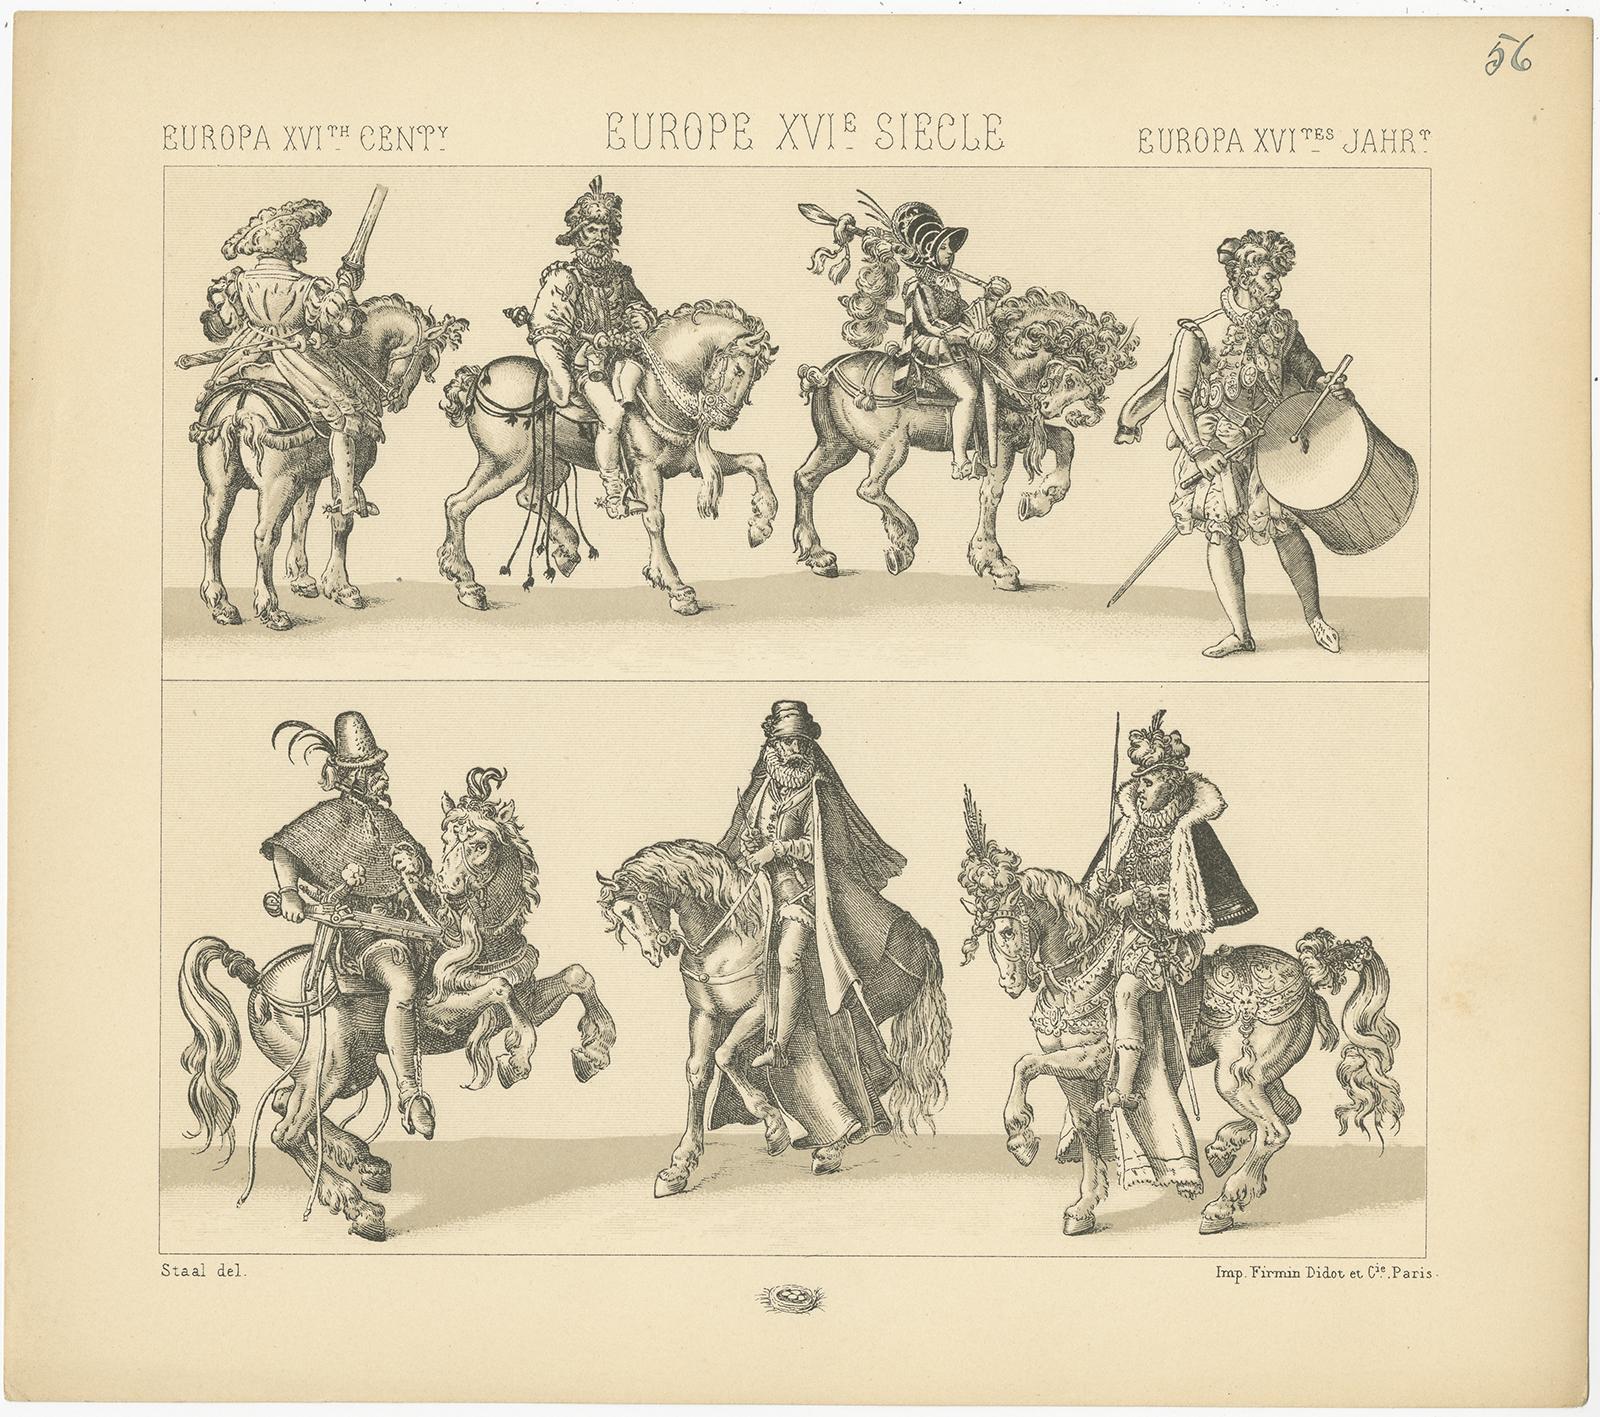 Antique print titled 'Europa XVIth Cent - Europe XVIe, Siecle - Europa XVItes Jahr'. Chromolithograph of European 16th century battle costumes. This print originates from 'Le Costume Historique' by M.A. Racinet. Published, circa 1880.